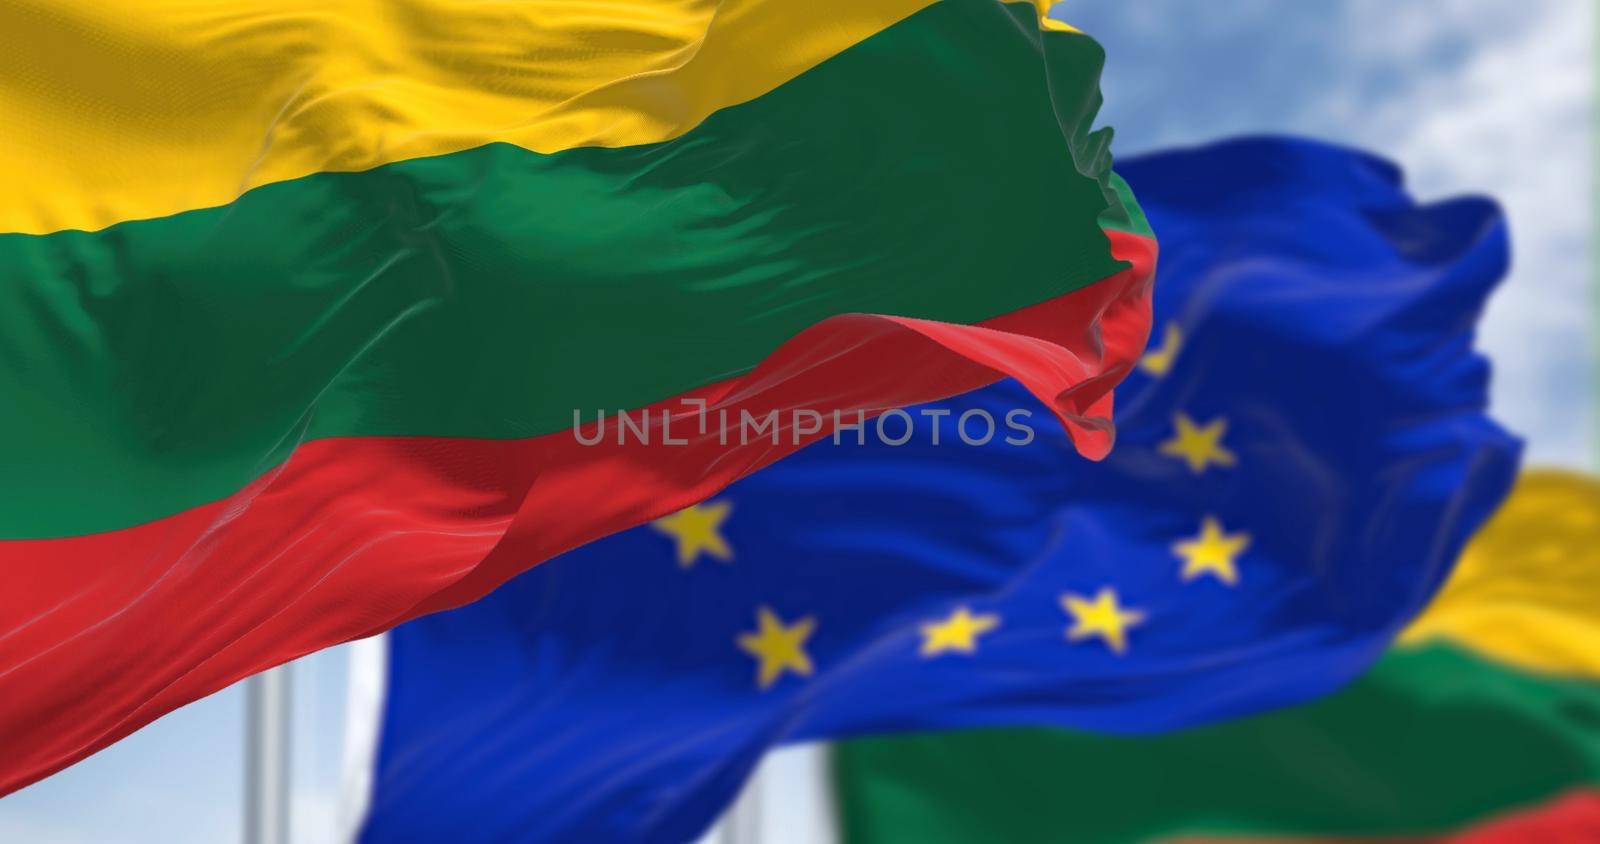 Detail of the national flag of Lithuania waving in the wind with blurred european union flag in the background on a clear day. Democracy and politics. European country. Selective focus.